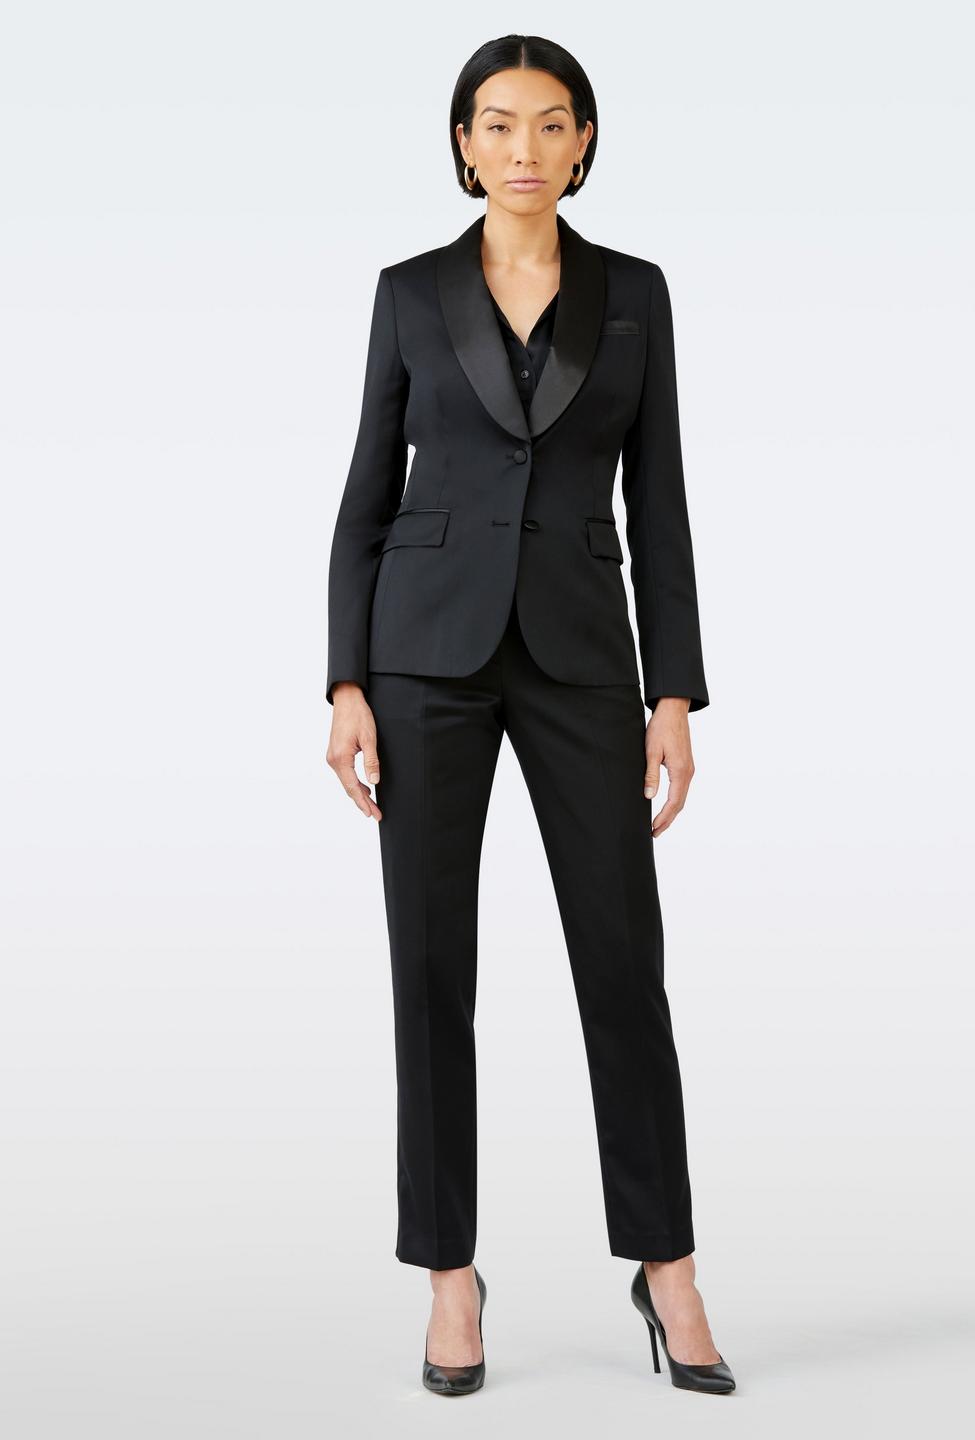 Black suit women - Hampton Solid Design from Tuxedo Indochino Collection